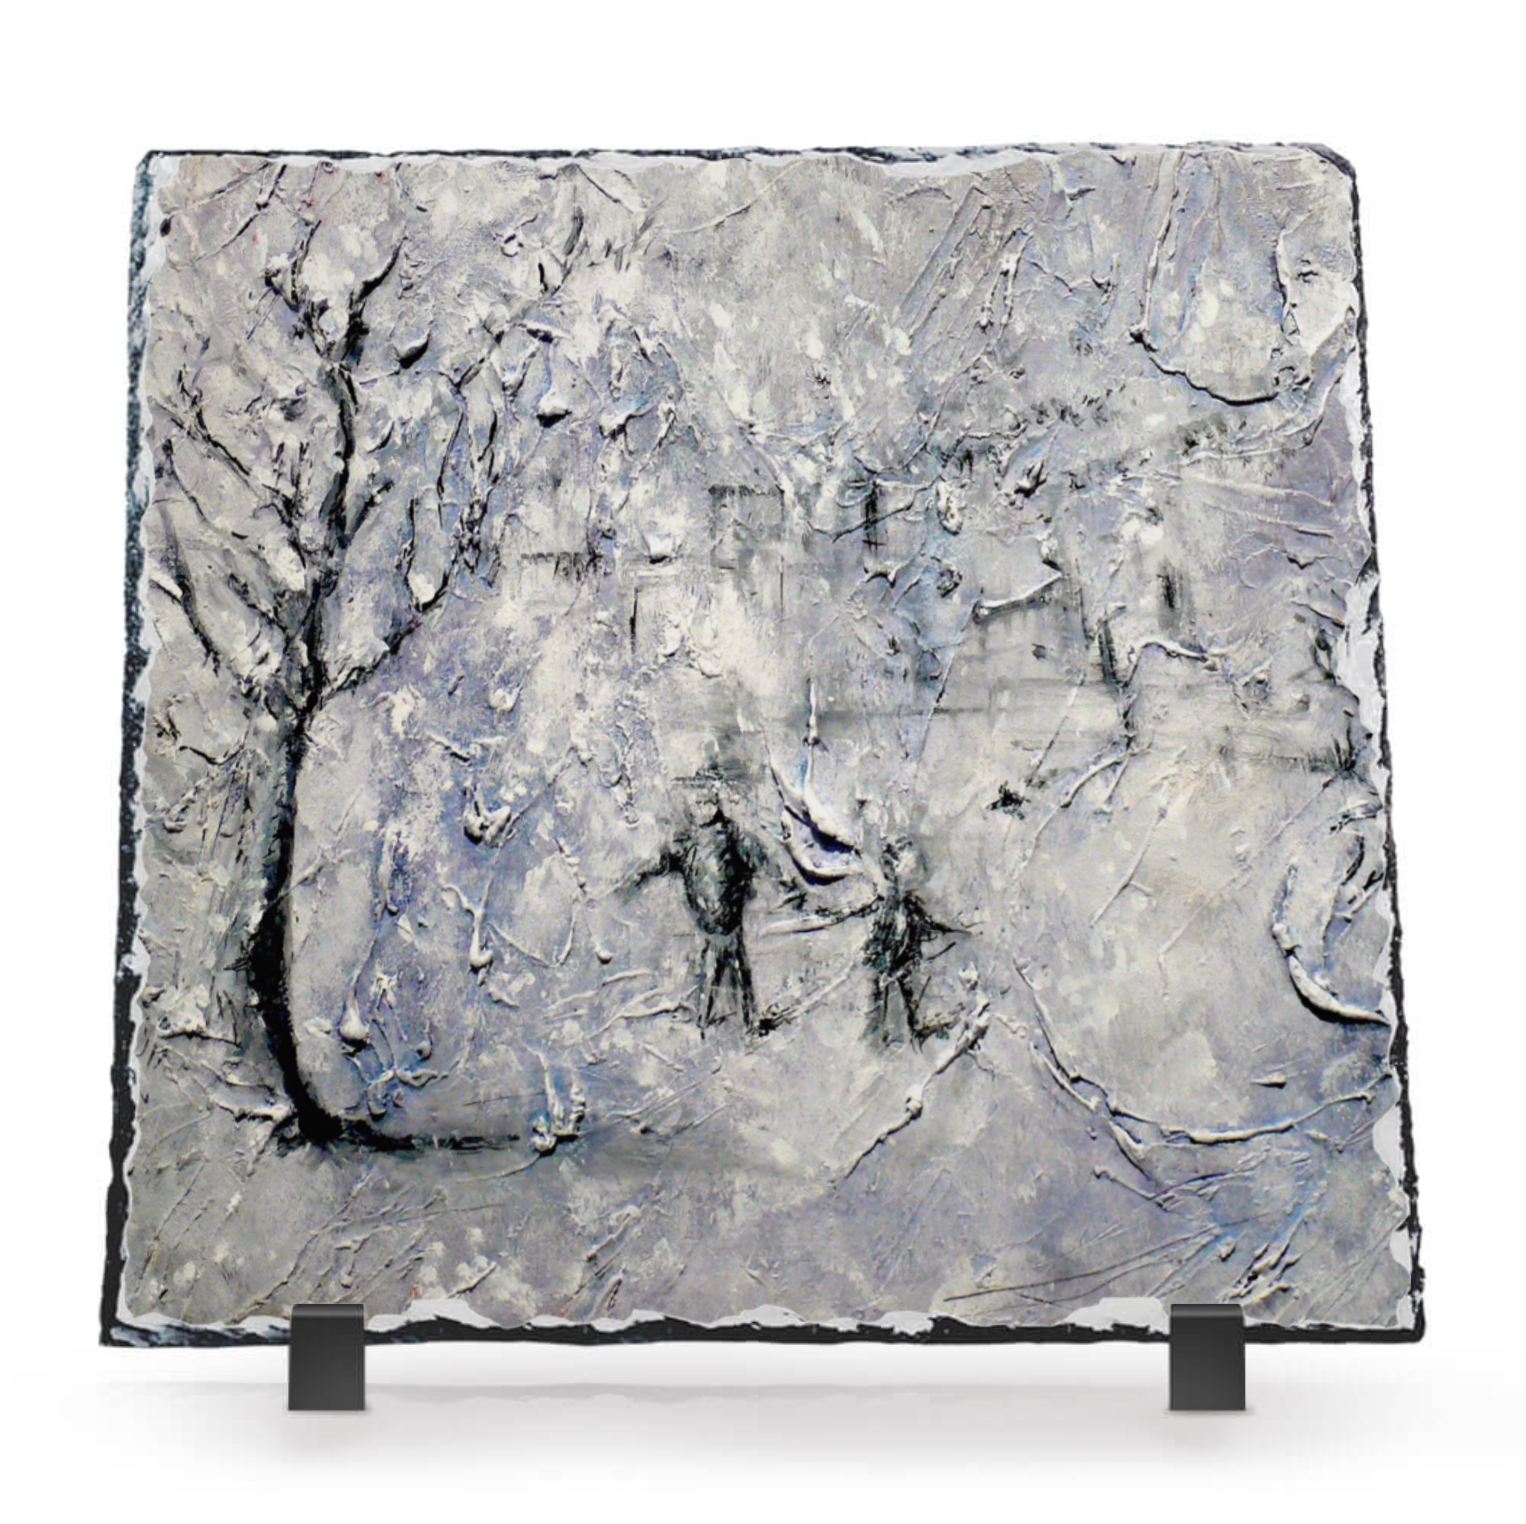 Father Daughter Snow Scottish Slate Art-Slate Art-Abstract & Impressionistic Art Gallery-Paintings, Prints, Homeware, Art Gifts From Scotland By Scottish Artist Kevin Hunter